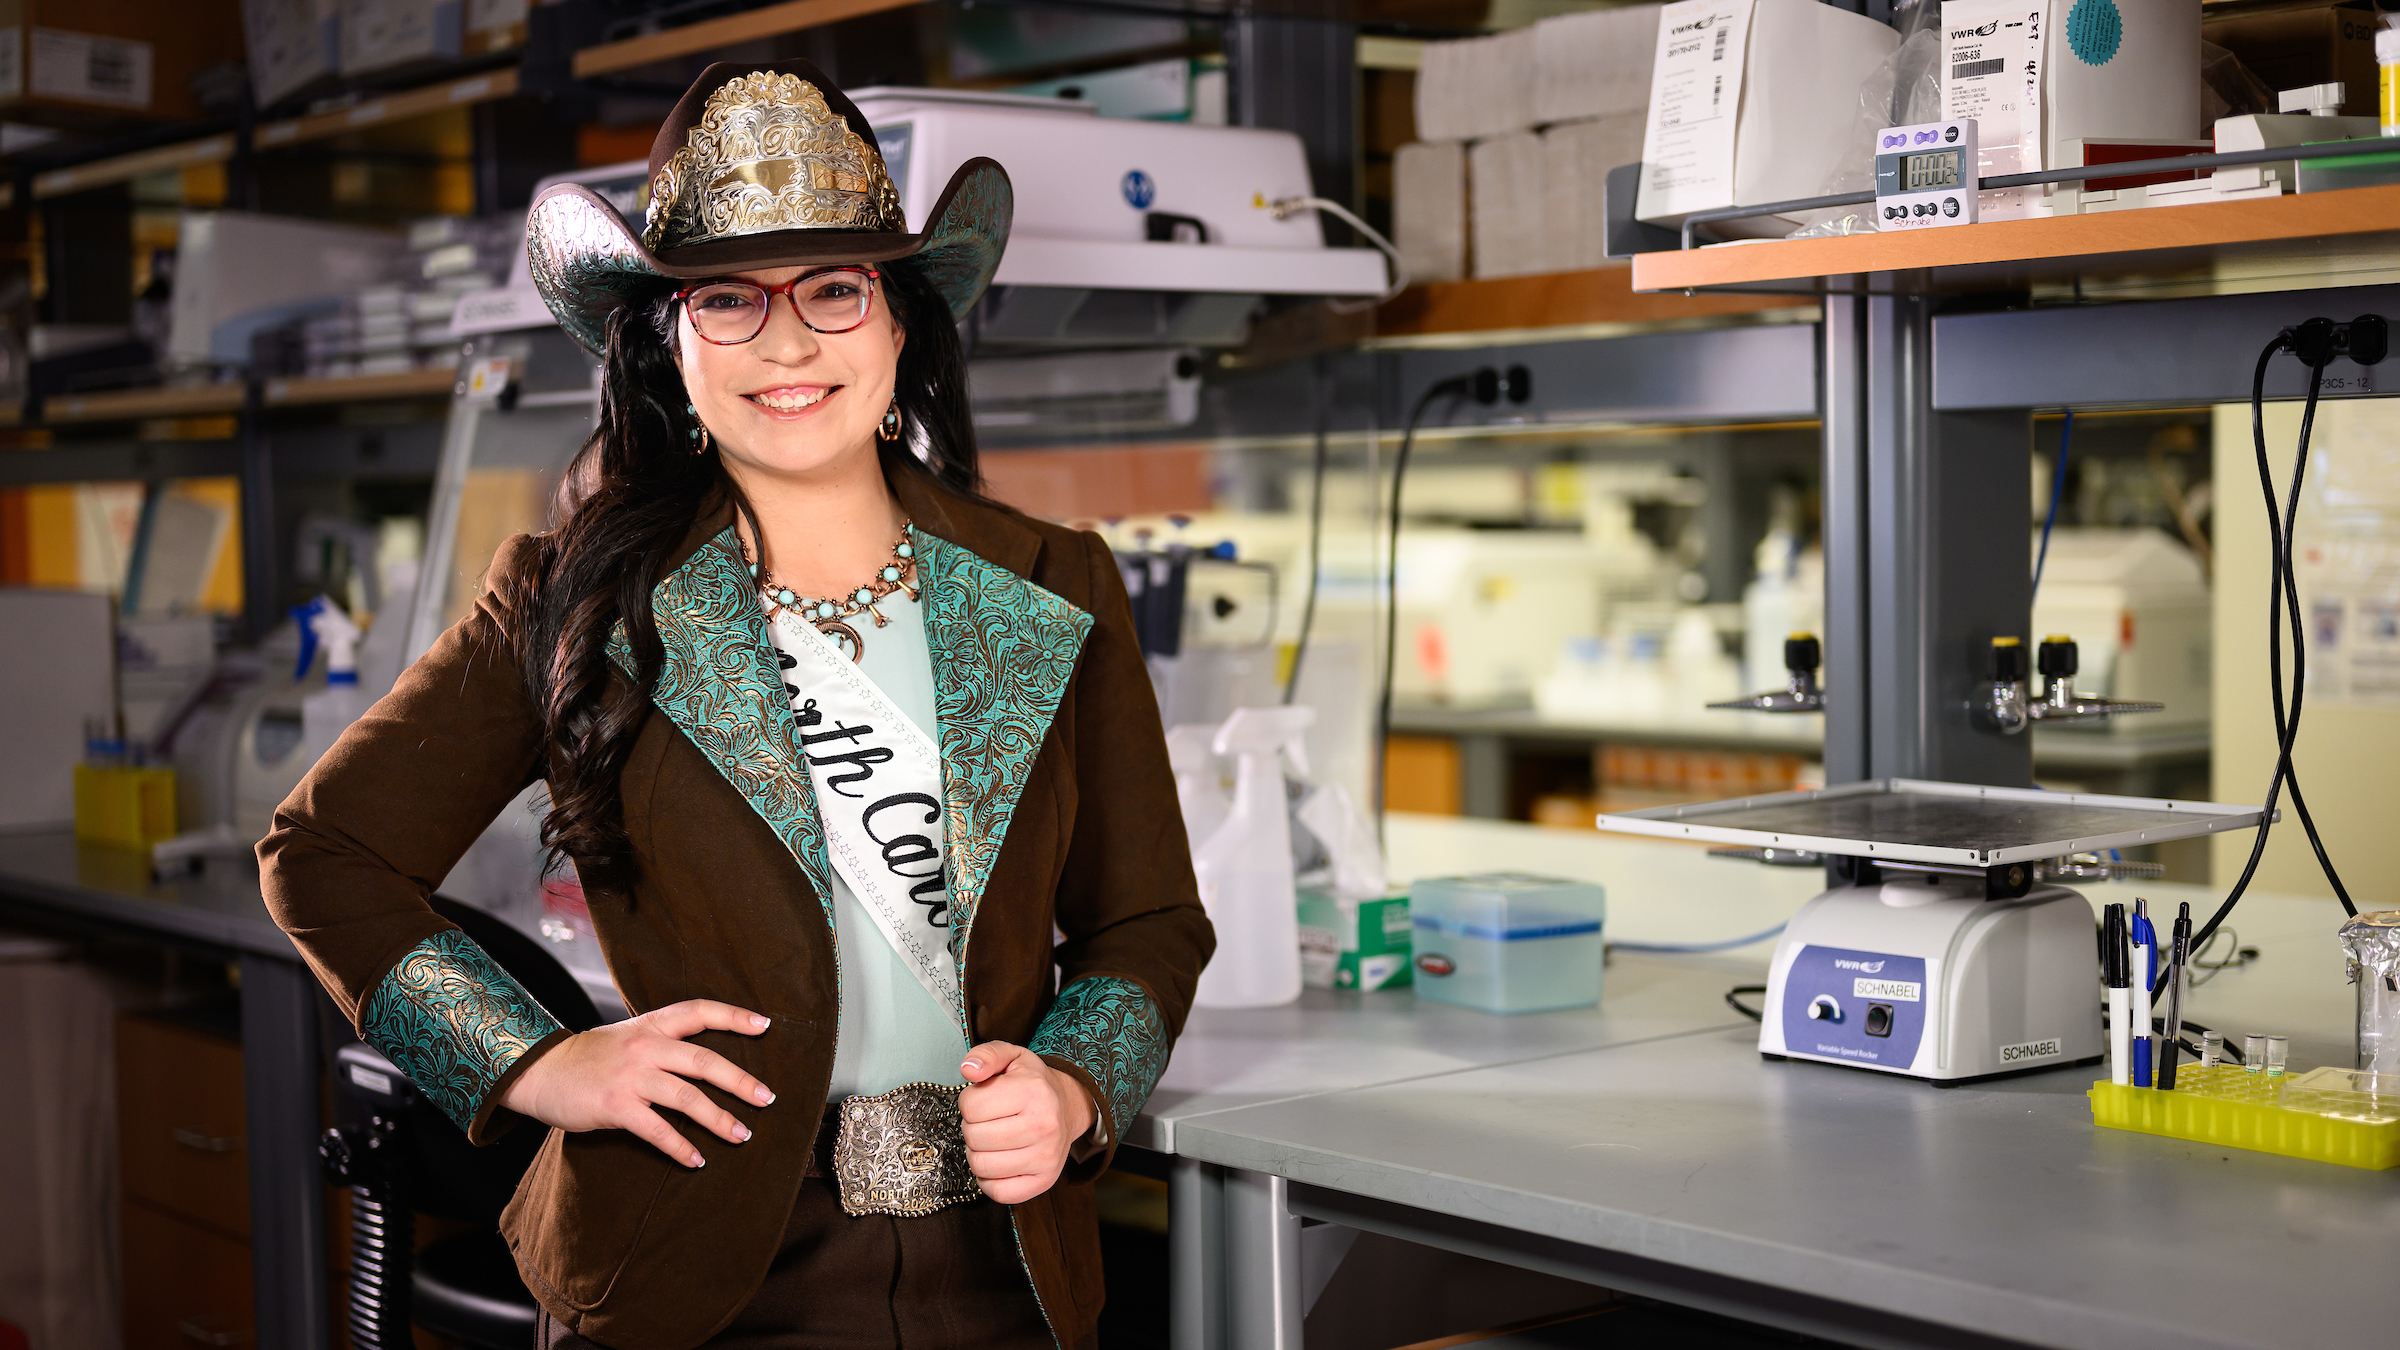 Miss Rodeo North Carolina, Rachel Gagliardi, poses in a laboratory. She has long, dark hair and glasses and is wearing a cowboy hat, a pageant sash and a brown and turquoise jacket.